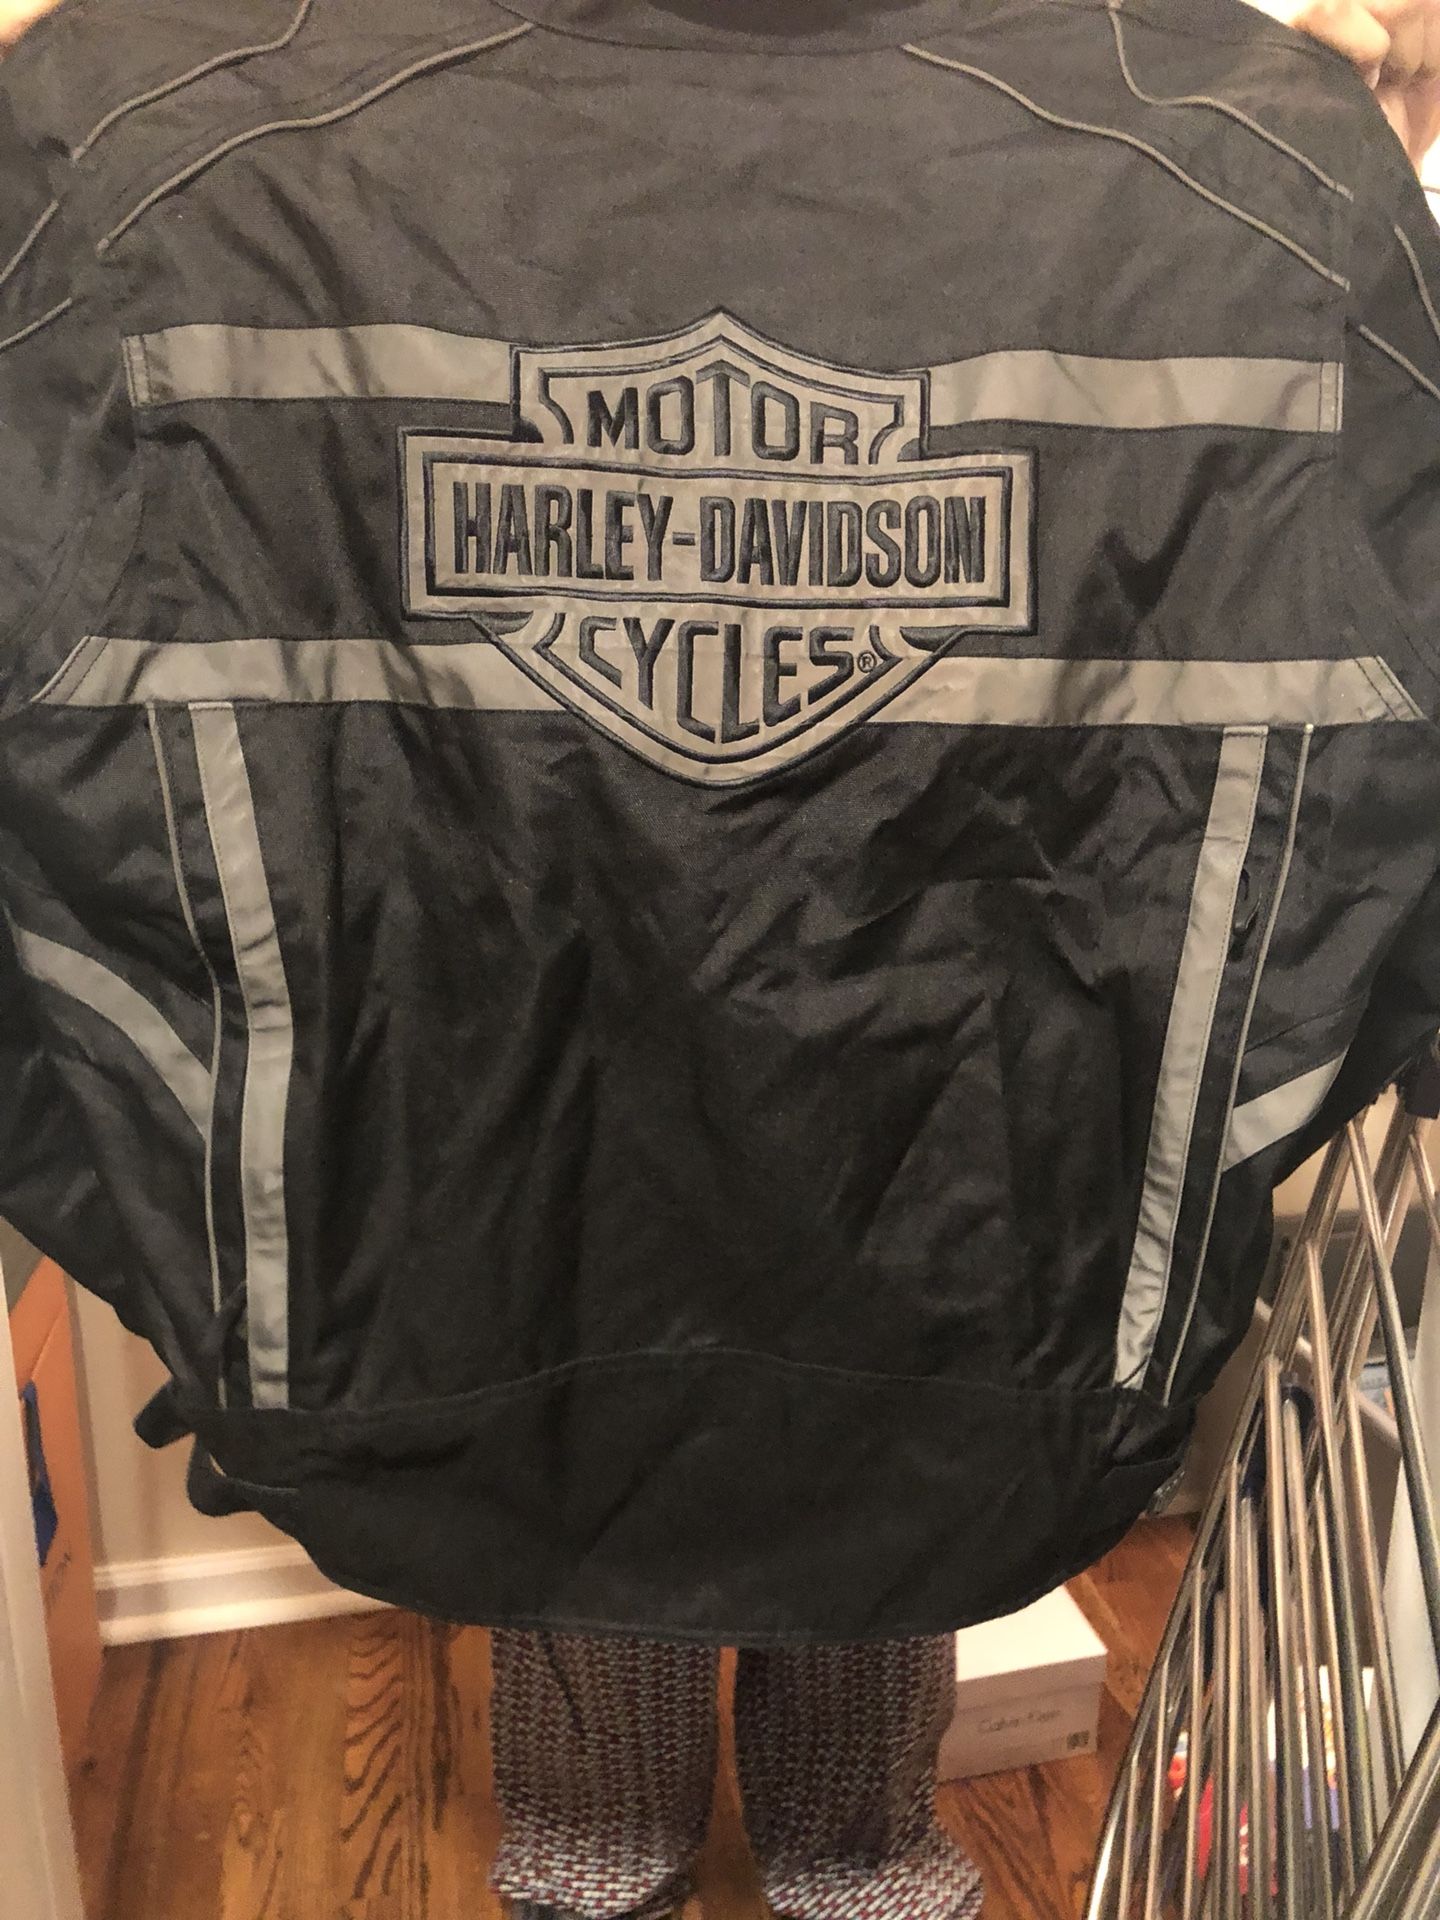 Official Harley Davidson motorcycle jacket - brand new $200- 2XL